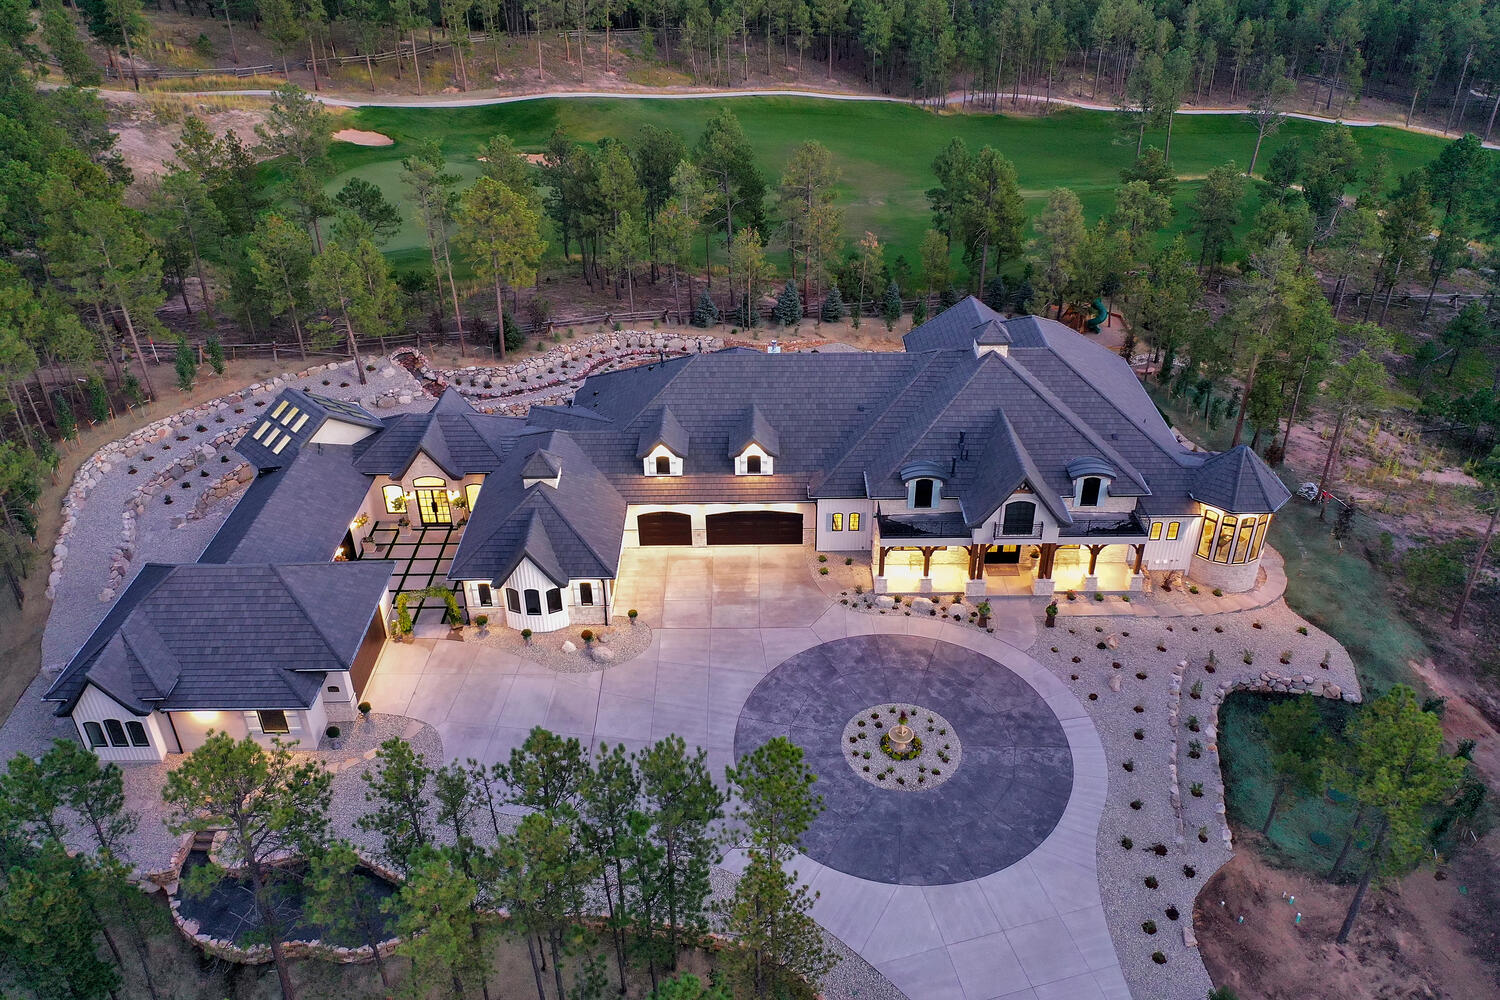 Exterior drone view of Villagree Luxury Homes from the 2021 Parade of Homes